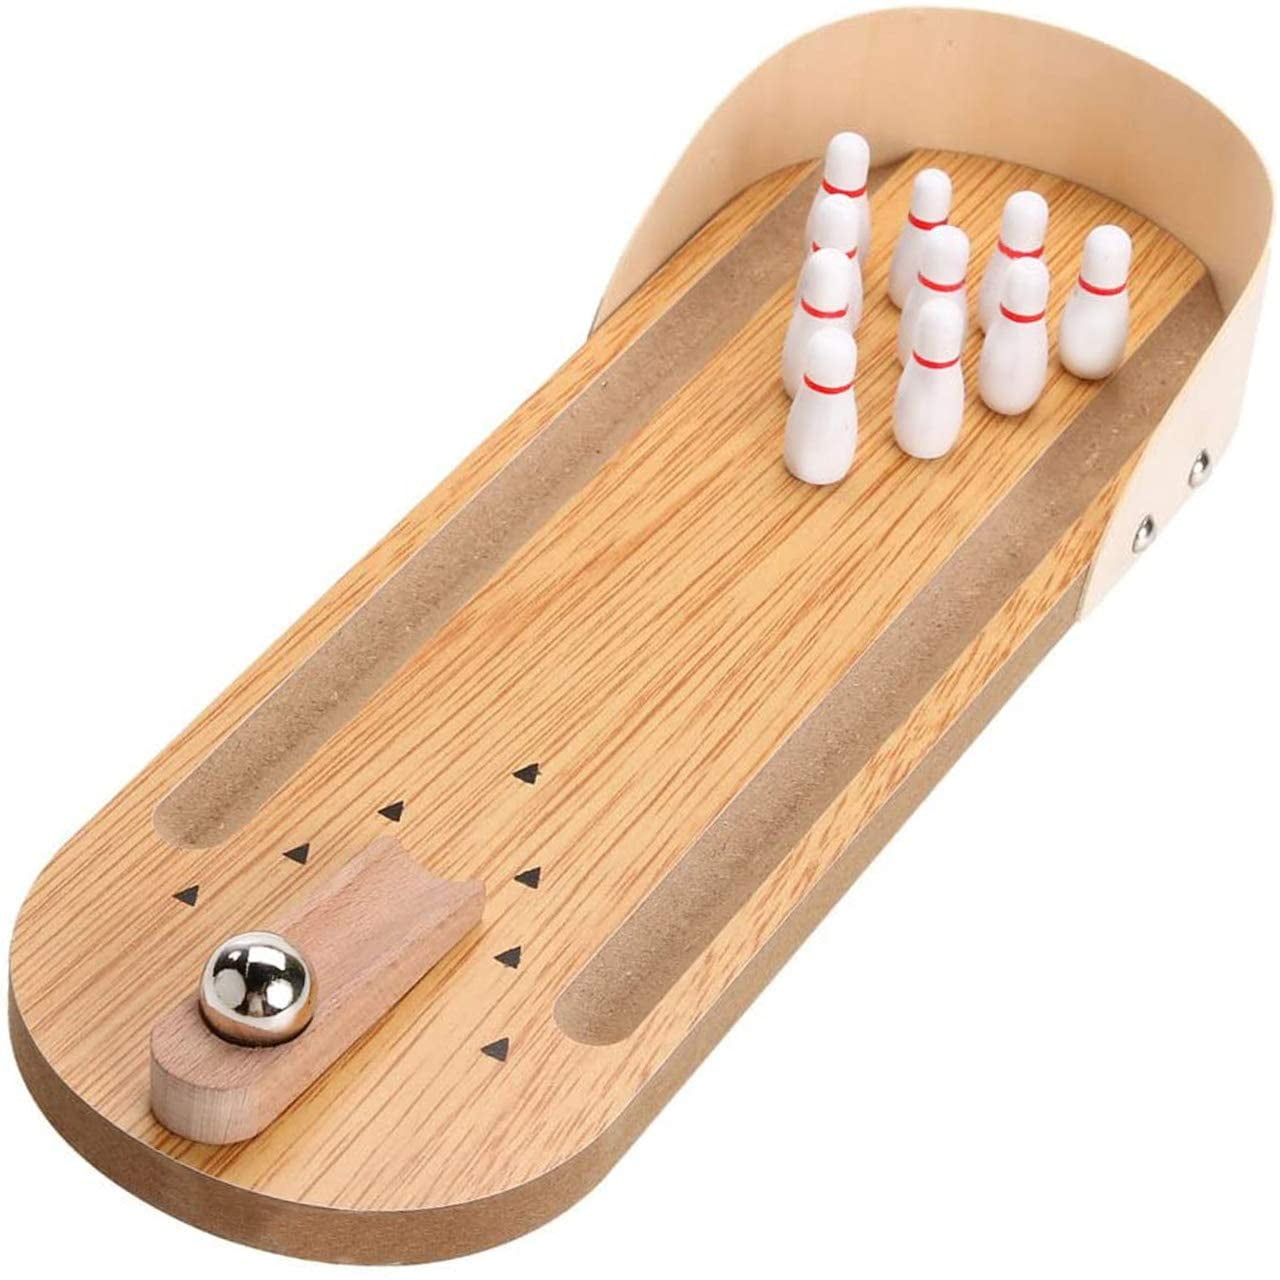 instructions on board pegs & dice included BOWLING Peg Game wood board 